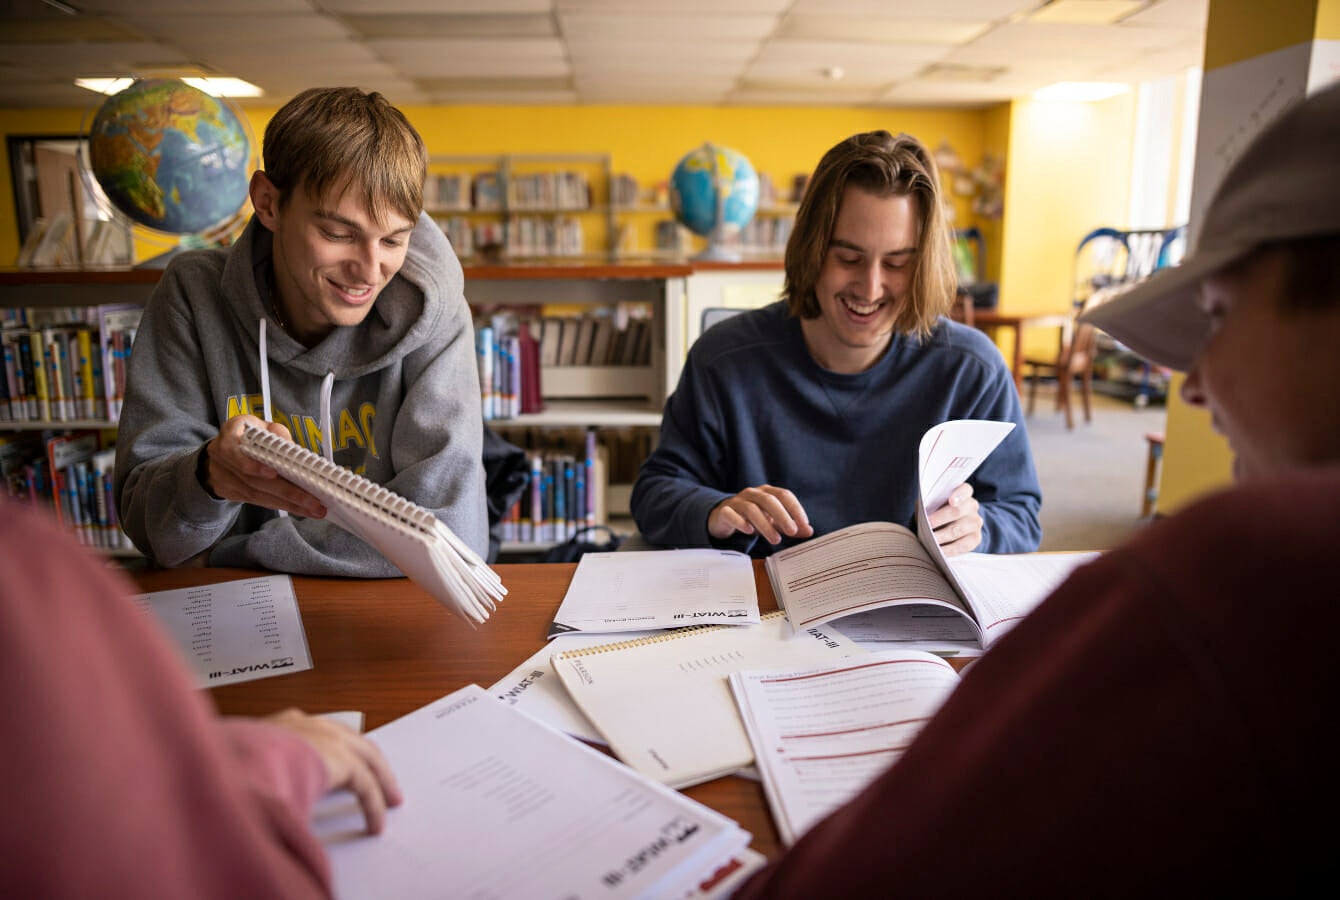 Two students smiling while reviewing notes